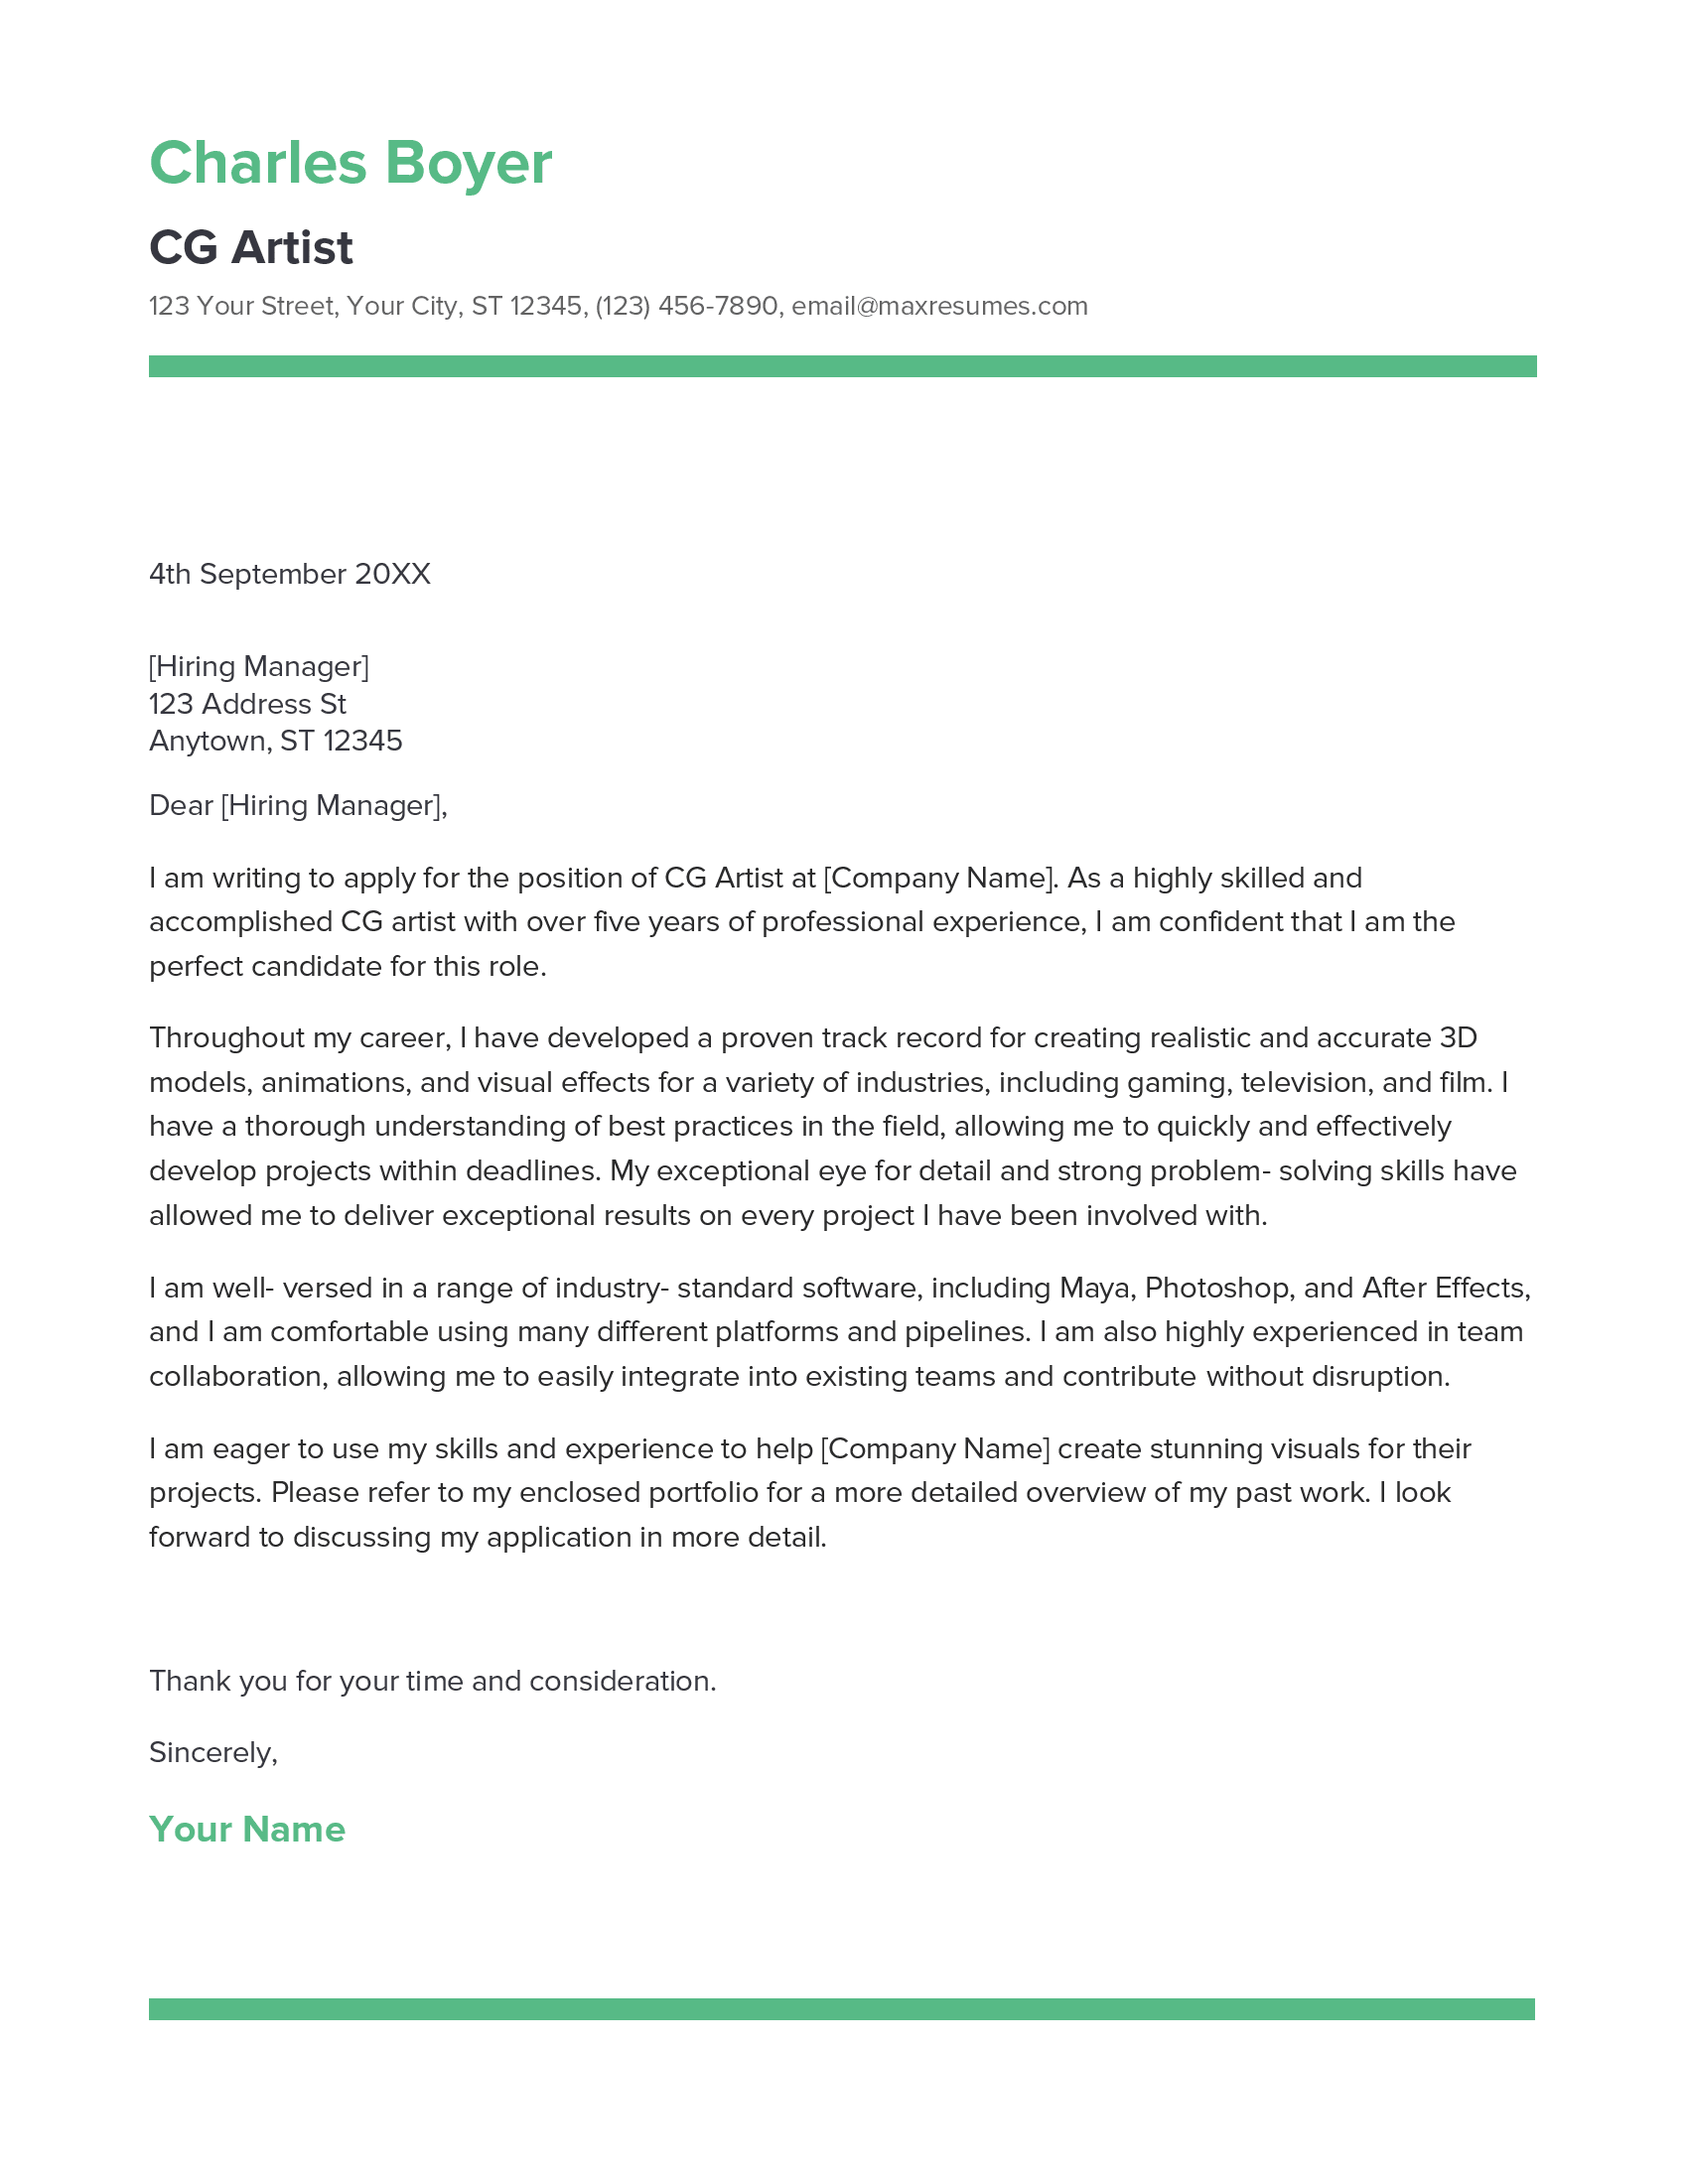 CG Artist Cover Letter Example